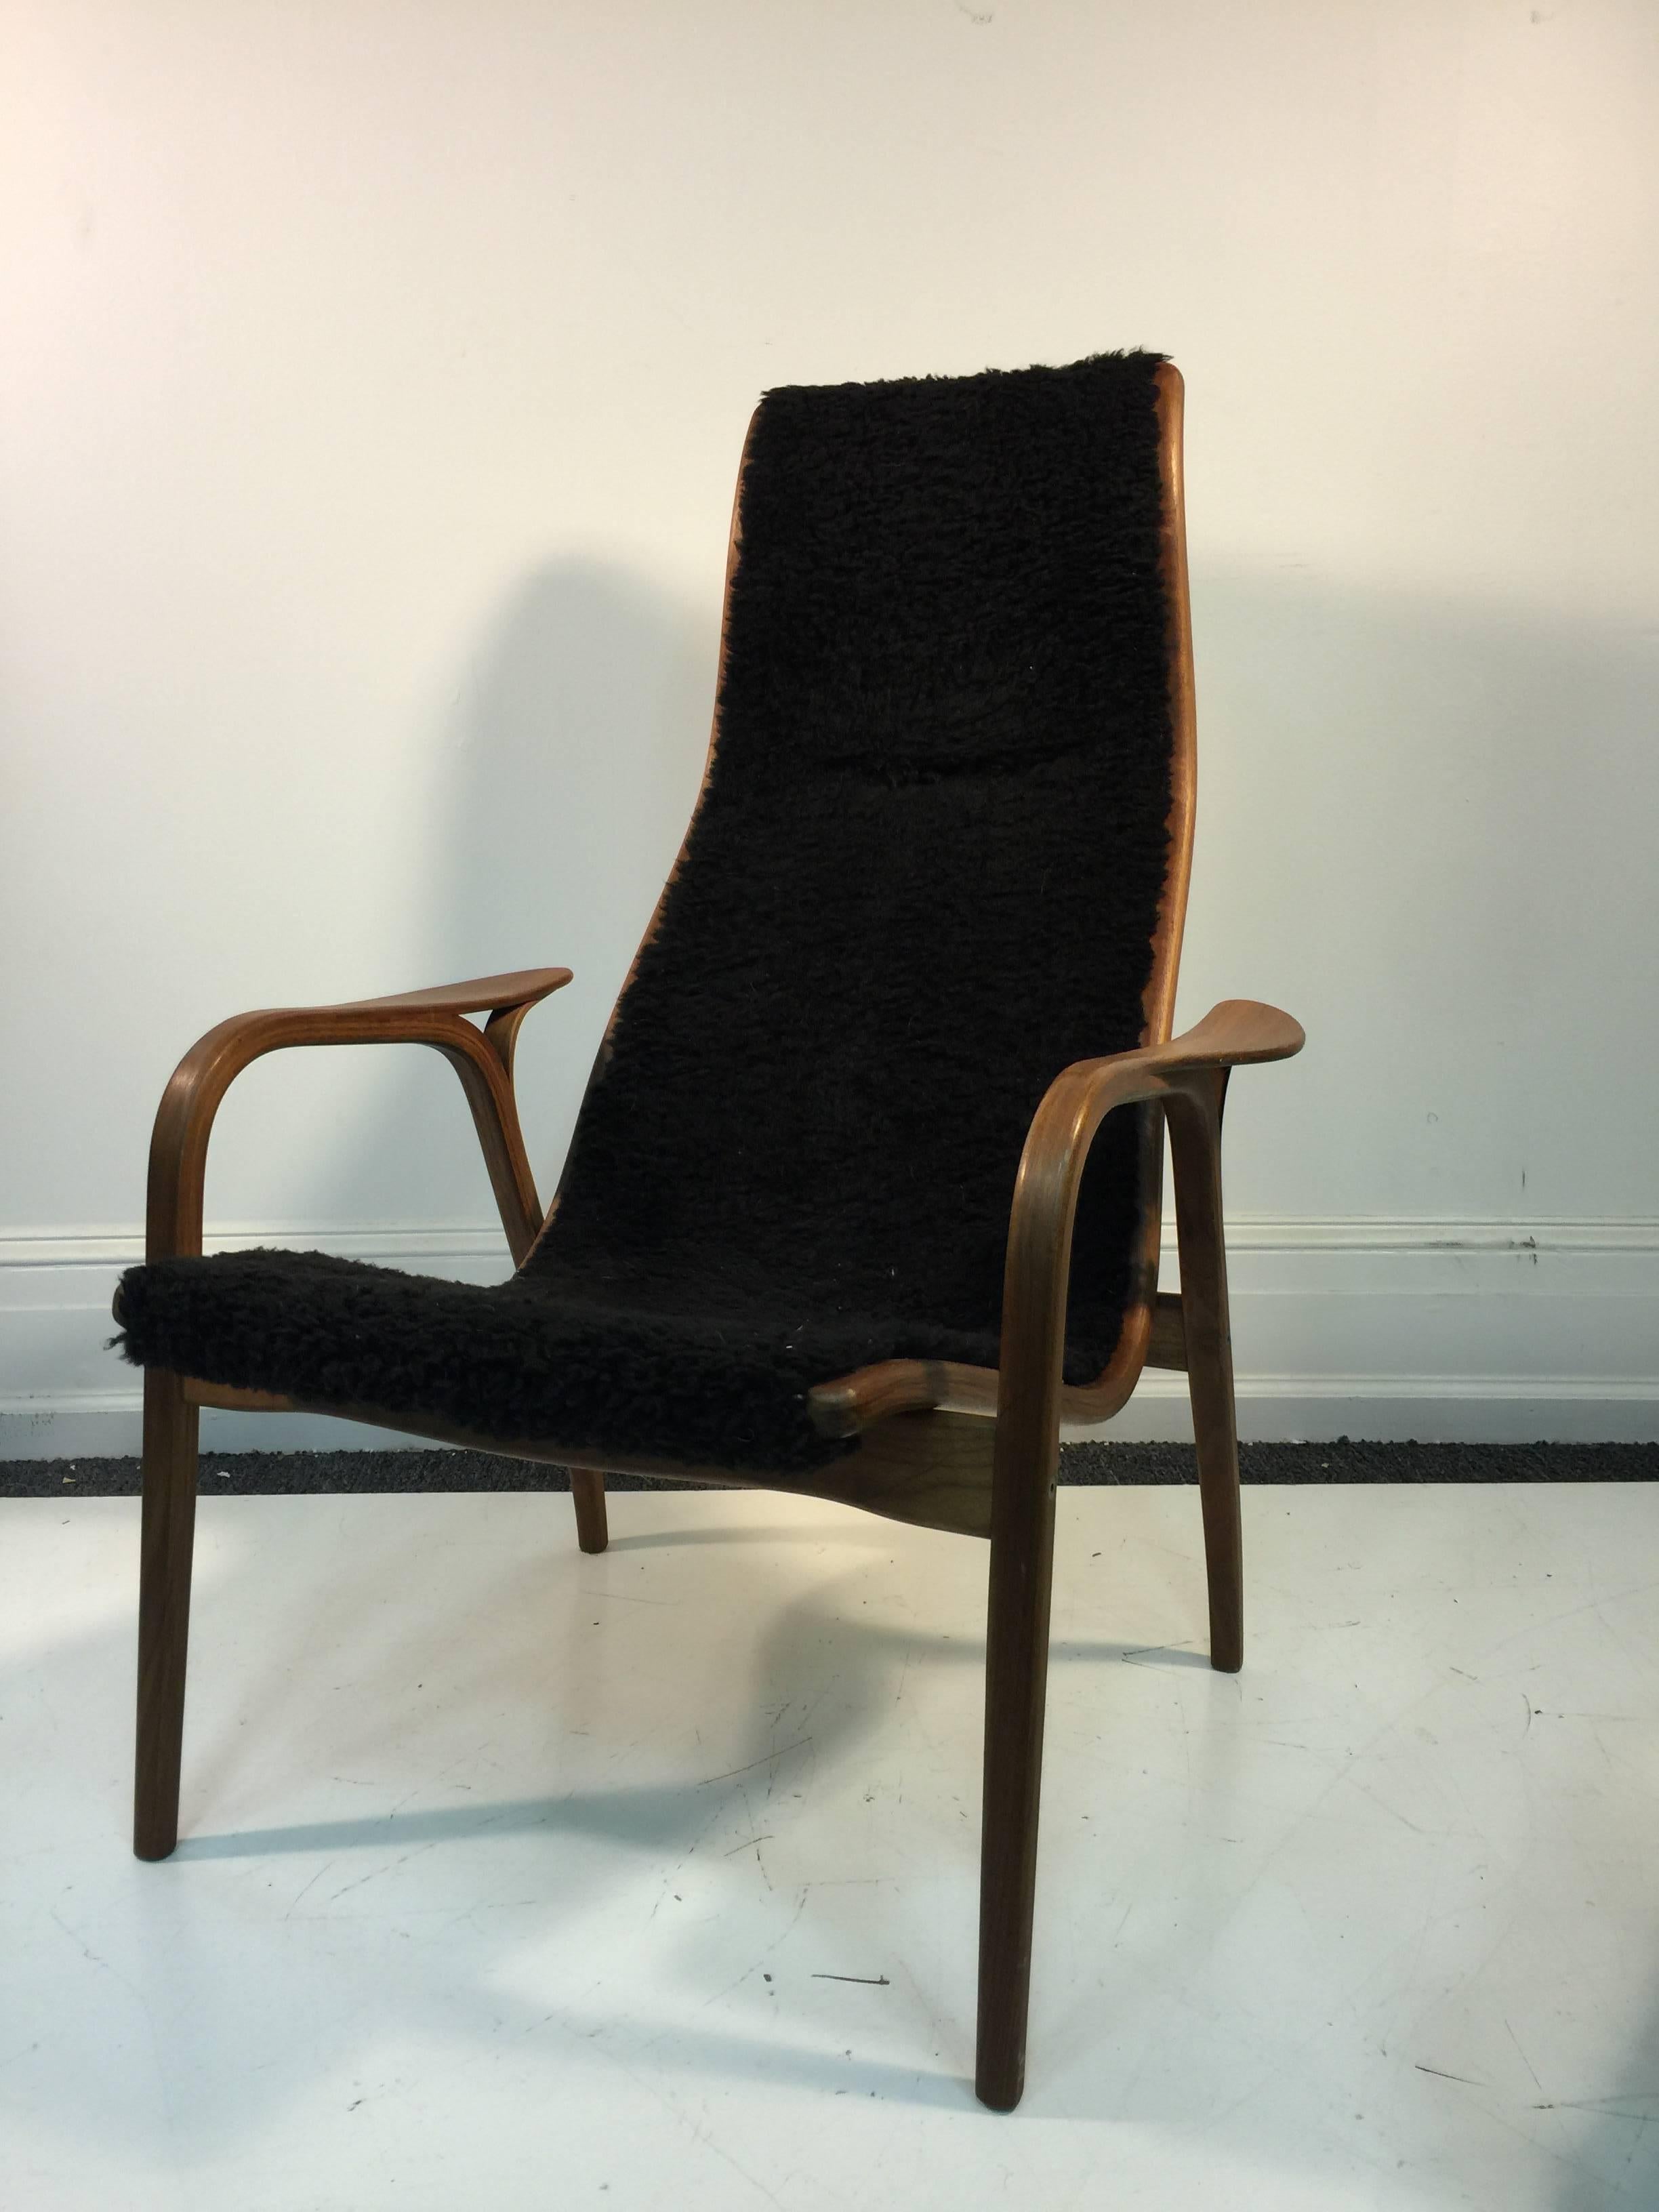 A Yngve Ekstrom Lamino high back lounge chair with matching ottoman made in Ystad, Sweden and upholstered in sheepskin, circa 1950.

Chair: 41 H x 30.5 D x 17.5 W x 16 S.
Ottoman: 19" H x 16" S x 18" D x 23.5" W.

 